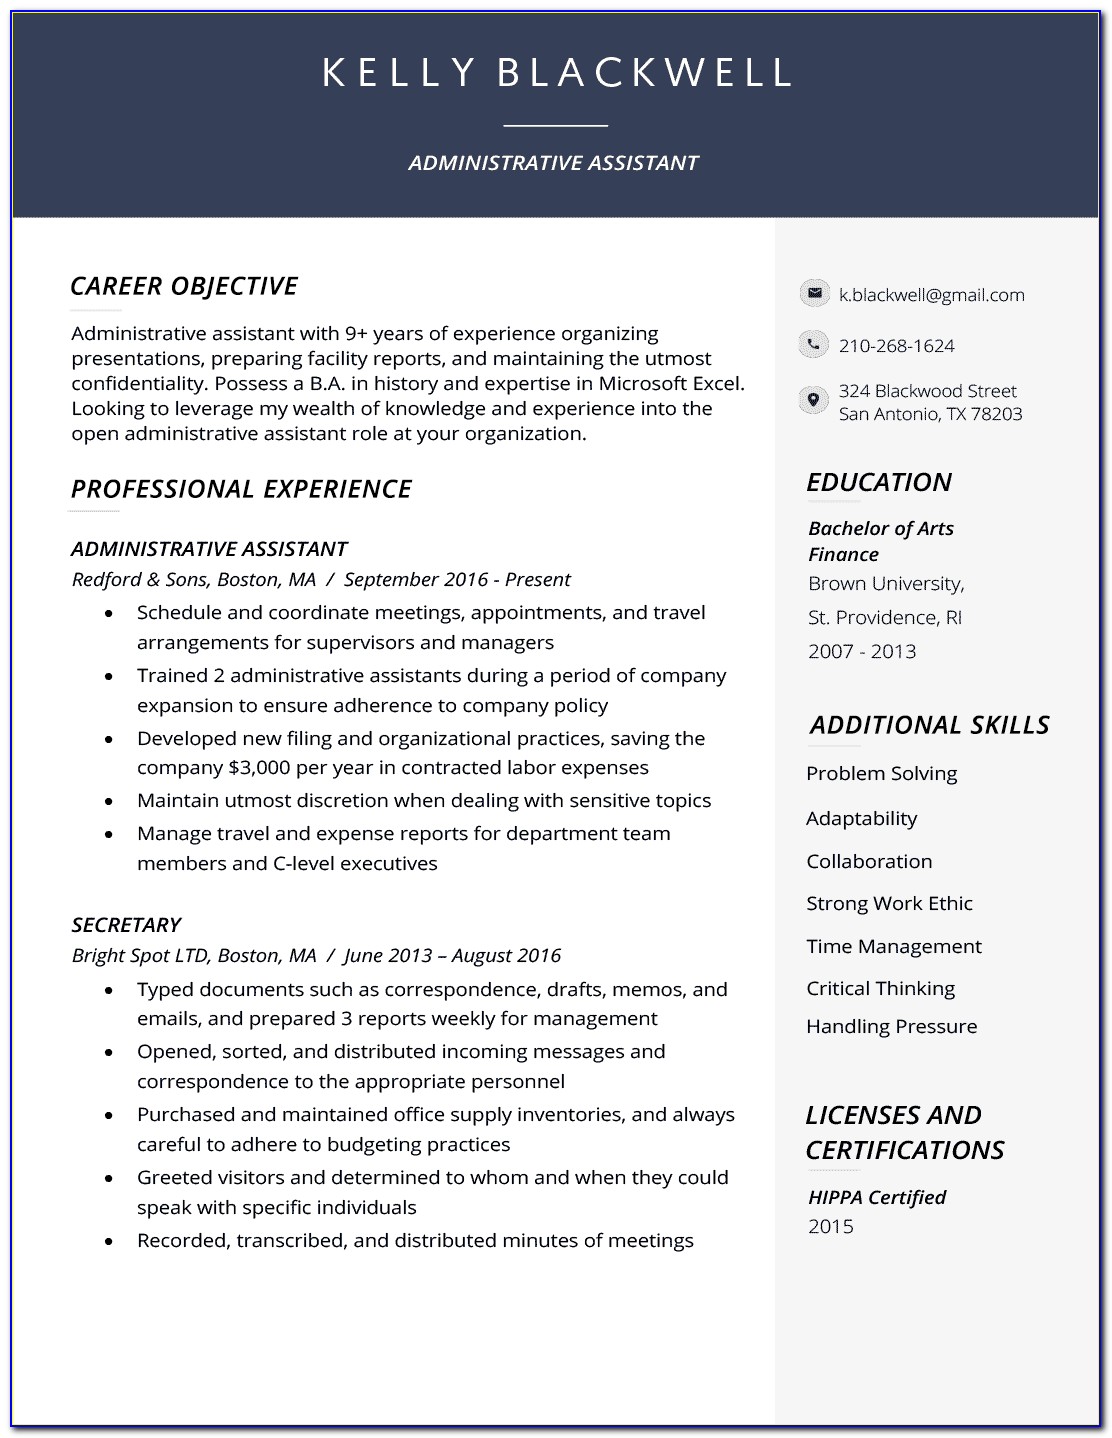 Resume Builder Examples Free